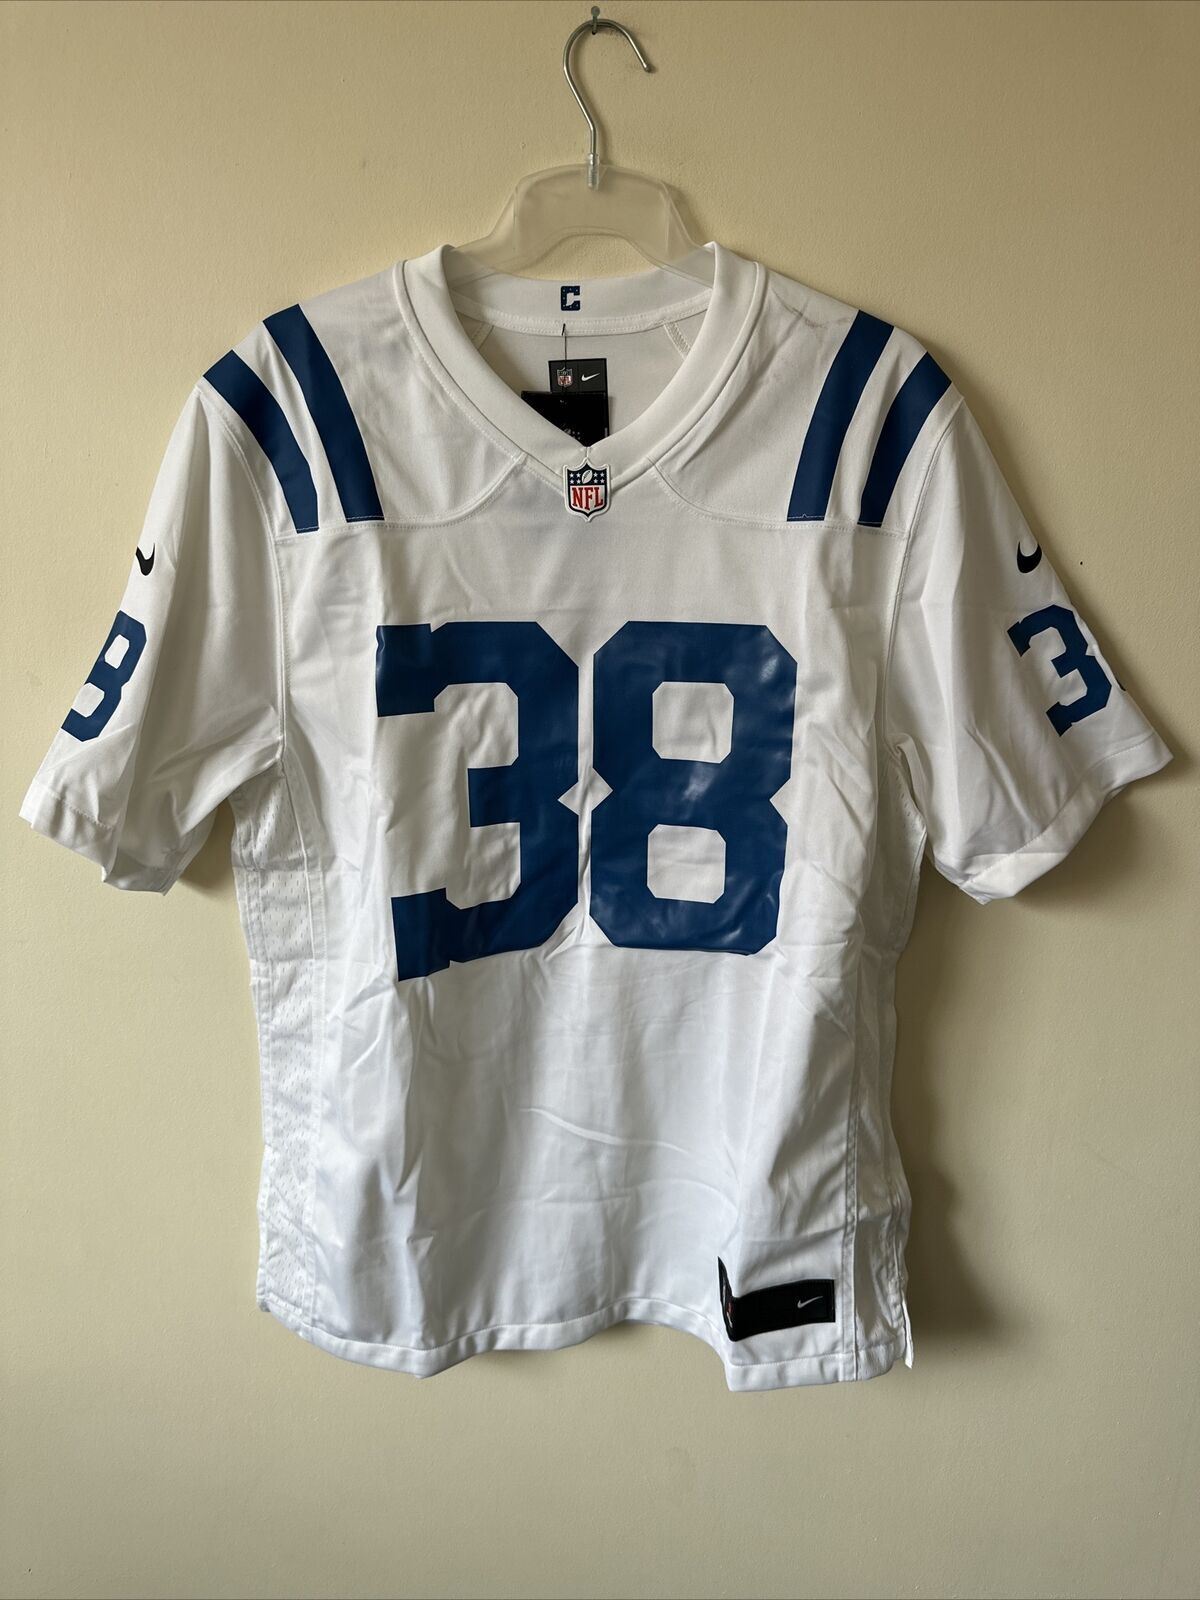 Nike NFL Indianapolis Colts Jersey DANIEL 38 Mens Large.